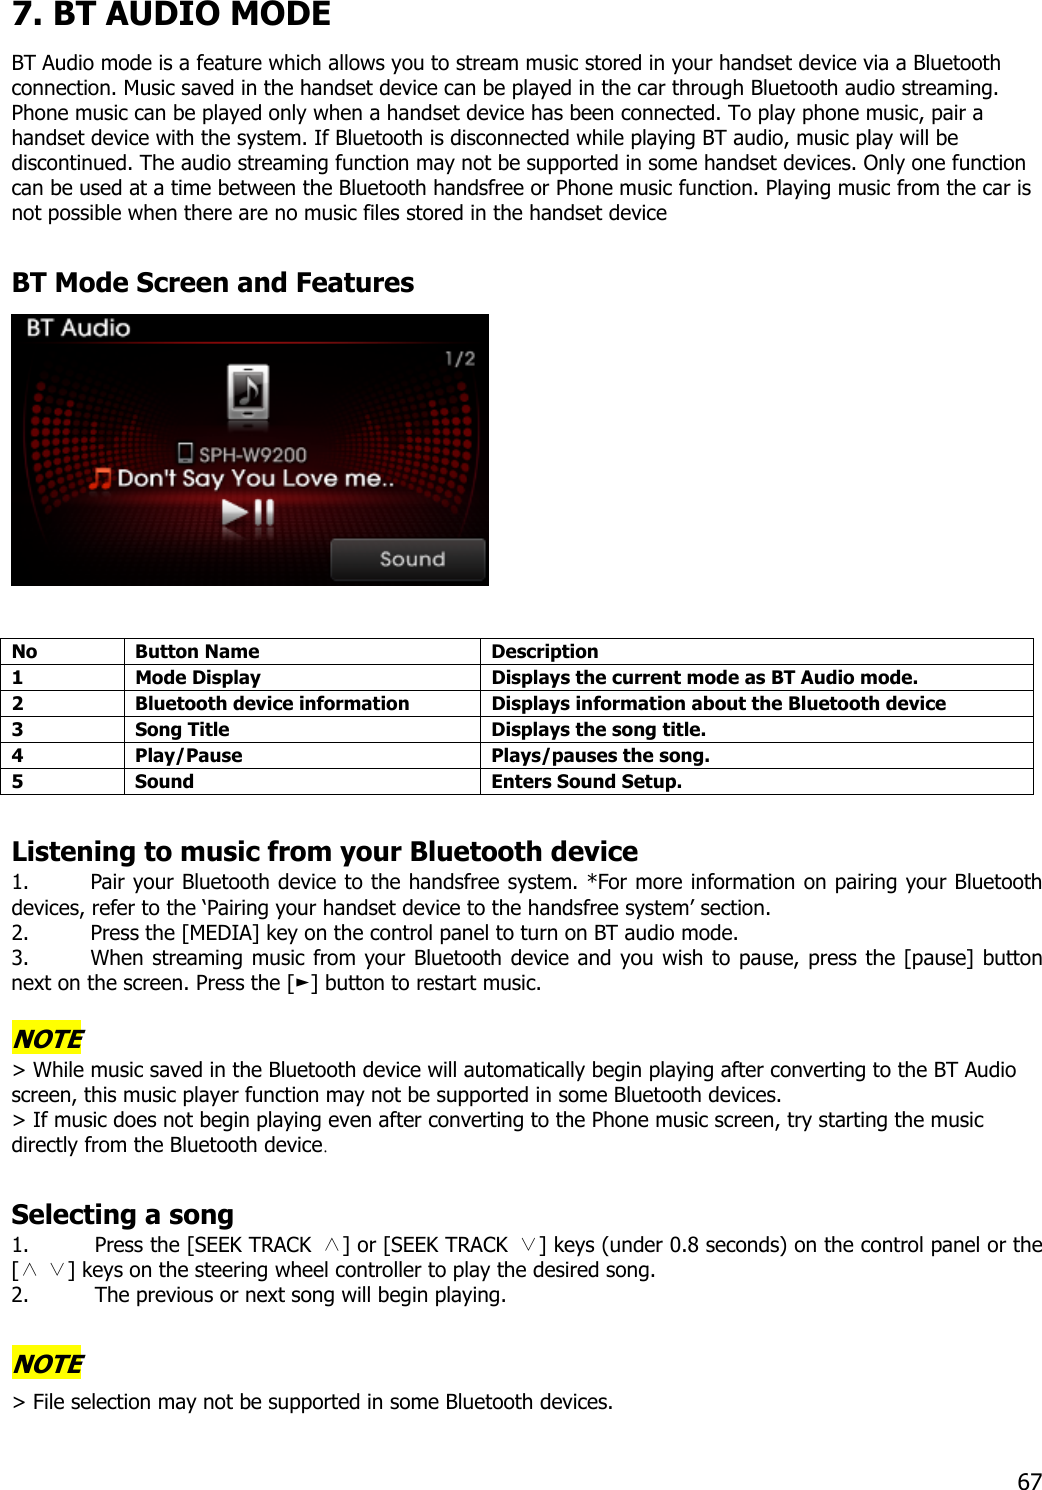 7. BT AUDIO MODE BT Audio mode is a feature which allows you to stream music stored in your handset device via a Bluetooth connection. Music saved in the handset device can be played in the car through Bluetooth audio streaming. Phone music can be played only when a handset device has been connected. To play phone music, pair a handset device with the system. If Bluetooth is disconnected while playing BT audio, music play will be discontinued. The audio streaming function may not be supported in some handset devices. Only one function can be used at a time between the Bluetooth handsfree or Phone music function. Playing music from the car is not possible when there are no music files stored in the handset device    BT Mode Screen and Features   No Button Name  Description 1  Mode Display  Displays the current mode as BT Audio mode. 2  Bluetooth device information  Displays information about the Bluetooth device 3  Song Title  Displays the song title. 4  Play/Pause    Plays/pauses the song. 5  Sound  Enters Sound Setup.  Listening to music from your Bluetooth device 1. Pair your Bluetooth device to the handsfree system. *For more information on pairing your Bluetooth devices, refer to the ‘Pairing your handset device to the handsfree system’ section.   2. Press the [MEDIA] key on the control panel to turn on BT audio mode. 3. When streaming music from your Bluetooth device and you wish to pause, press the [pause] button next on the screen. Press the [►] button to restart music.  NOTE &gt; While music saved in the Bluetooth device will automatically begin playing after converting to the BT Audio screen, this music player function may not be supported in some Bluetooth devices. &gt; If music does not begin playing even after converting to the Phone music screen, try starting the music directly from the Bluetooth device.  Selecting a song 1. Press the [SEEK TRACK  ∧] or [SEEK TRACK  ∨] keys (under 0.8 seconds) on the control panel or the [   ] keys on the steering wh∧∨ eel controller to play the desired song.   2. The previous or next song will begin playing.  NOTE &gt; File selection may not be supported in some Bluetooth devices.  67